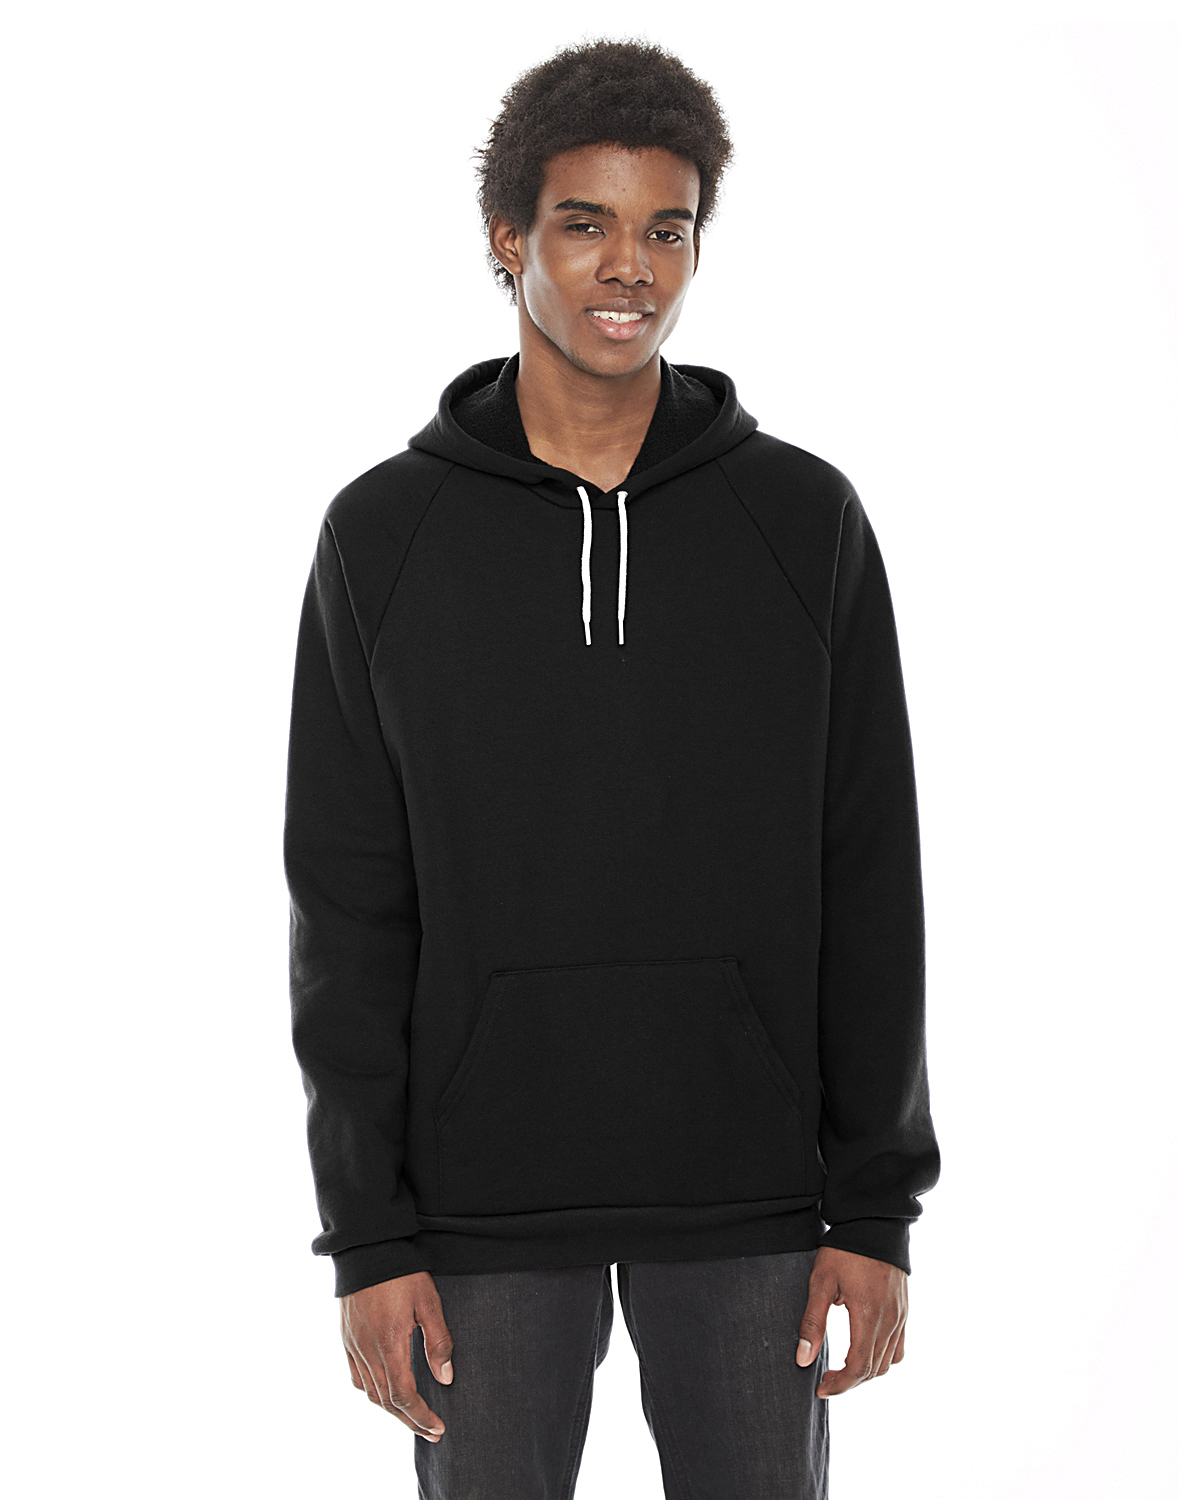 HVT495W American Apparel Unisex Classic Pullover Hoodie